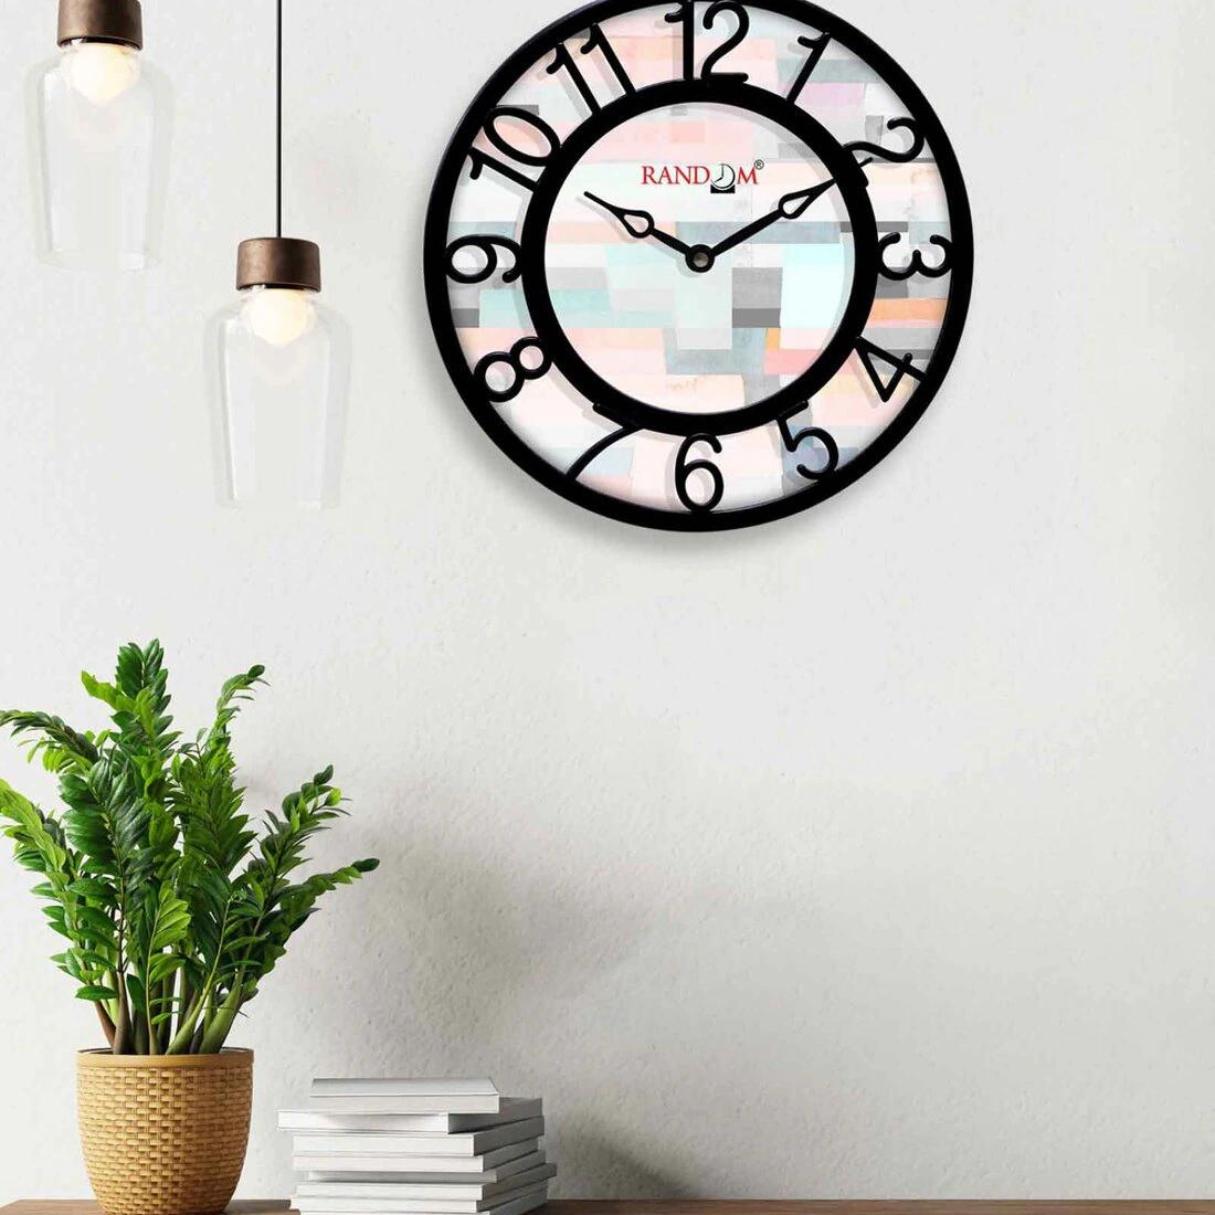 How To Make A Wall Clock